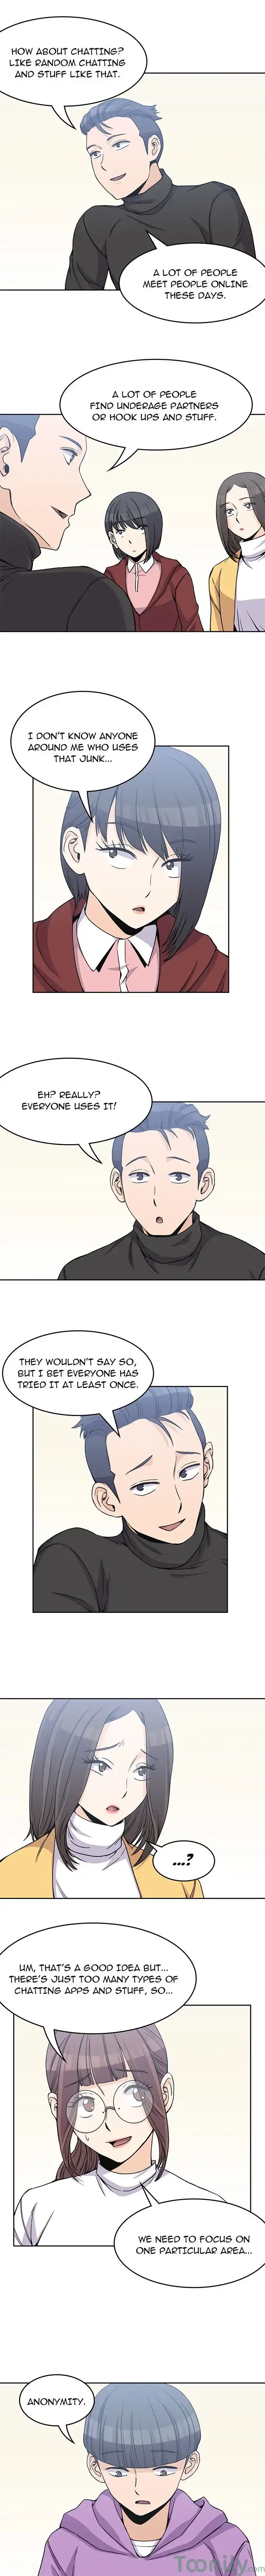 Boys are Boys - Chapter 4 Page 5